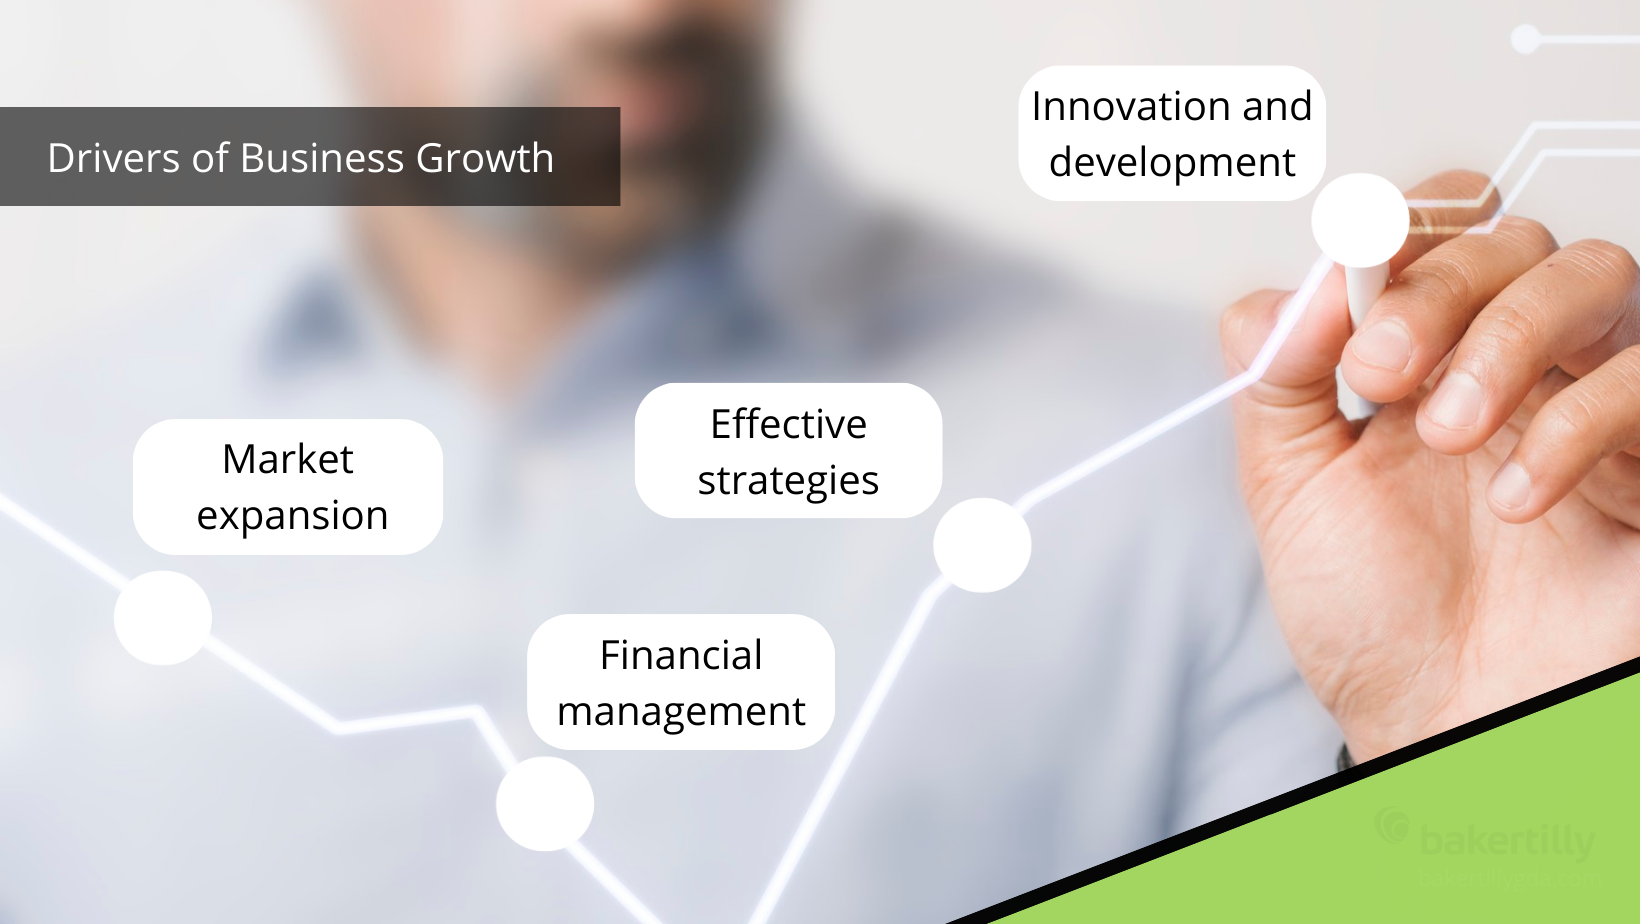 Drivers of Business Growth